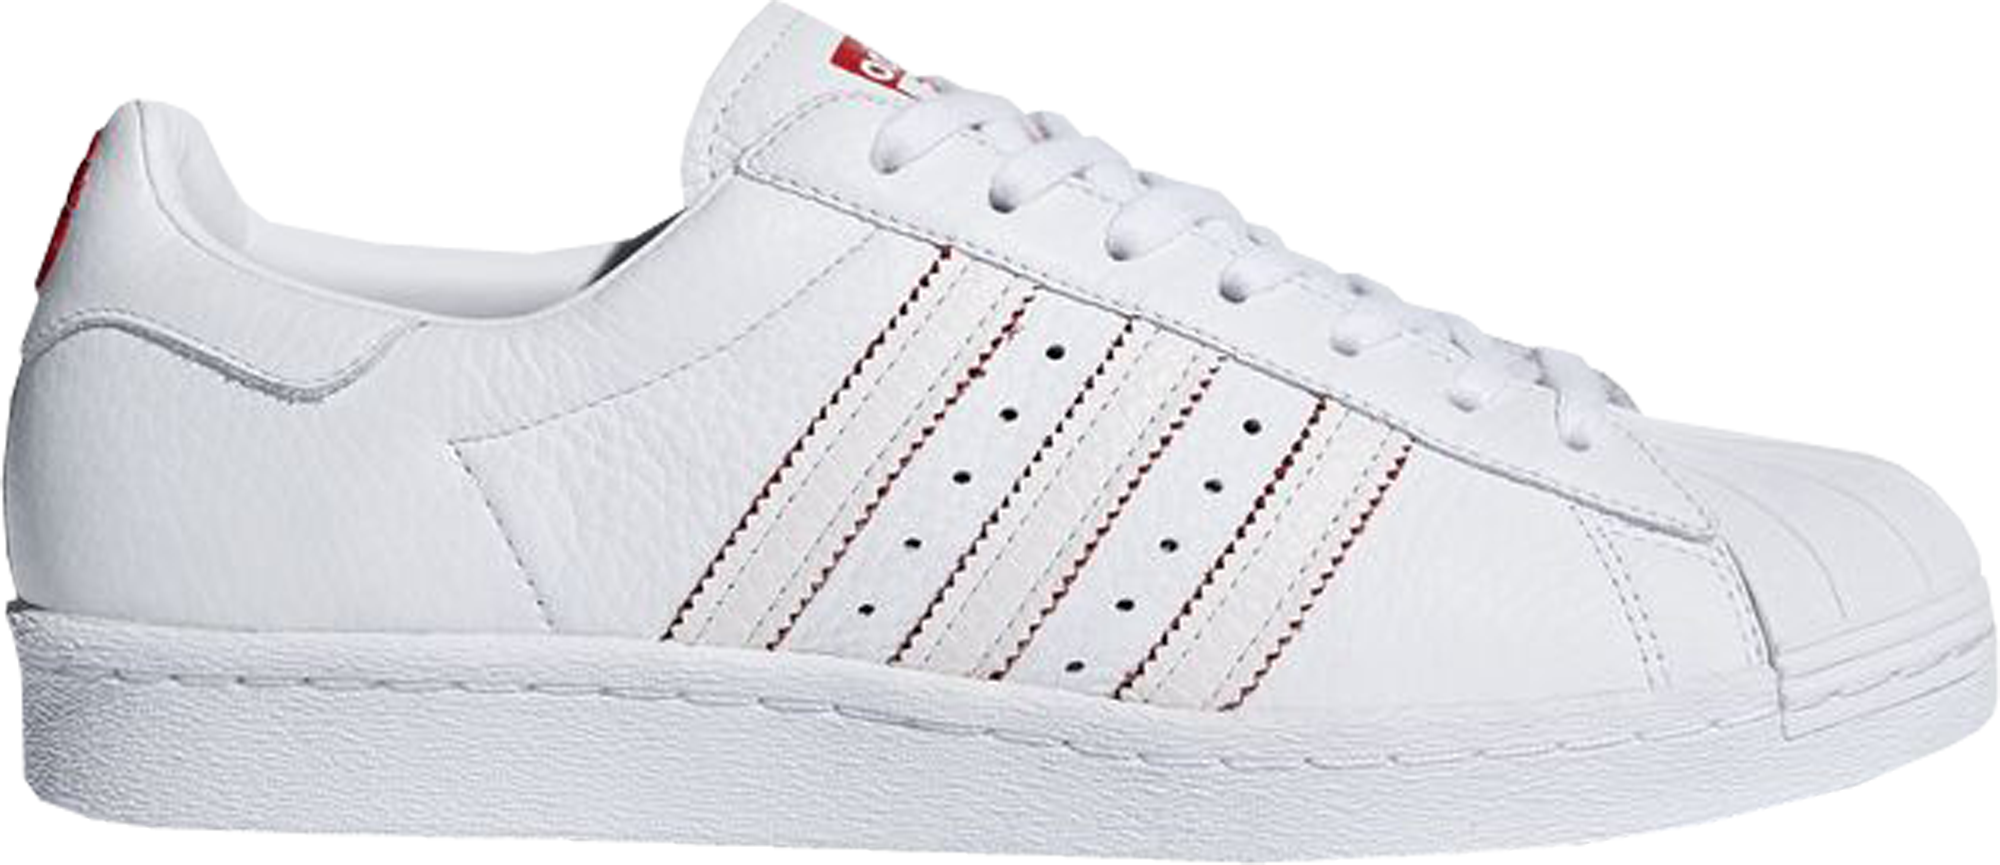 adidas Superstar 80s Chinese New Year 